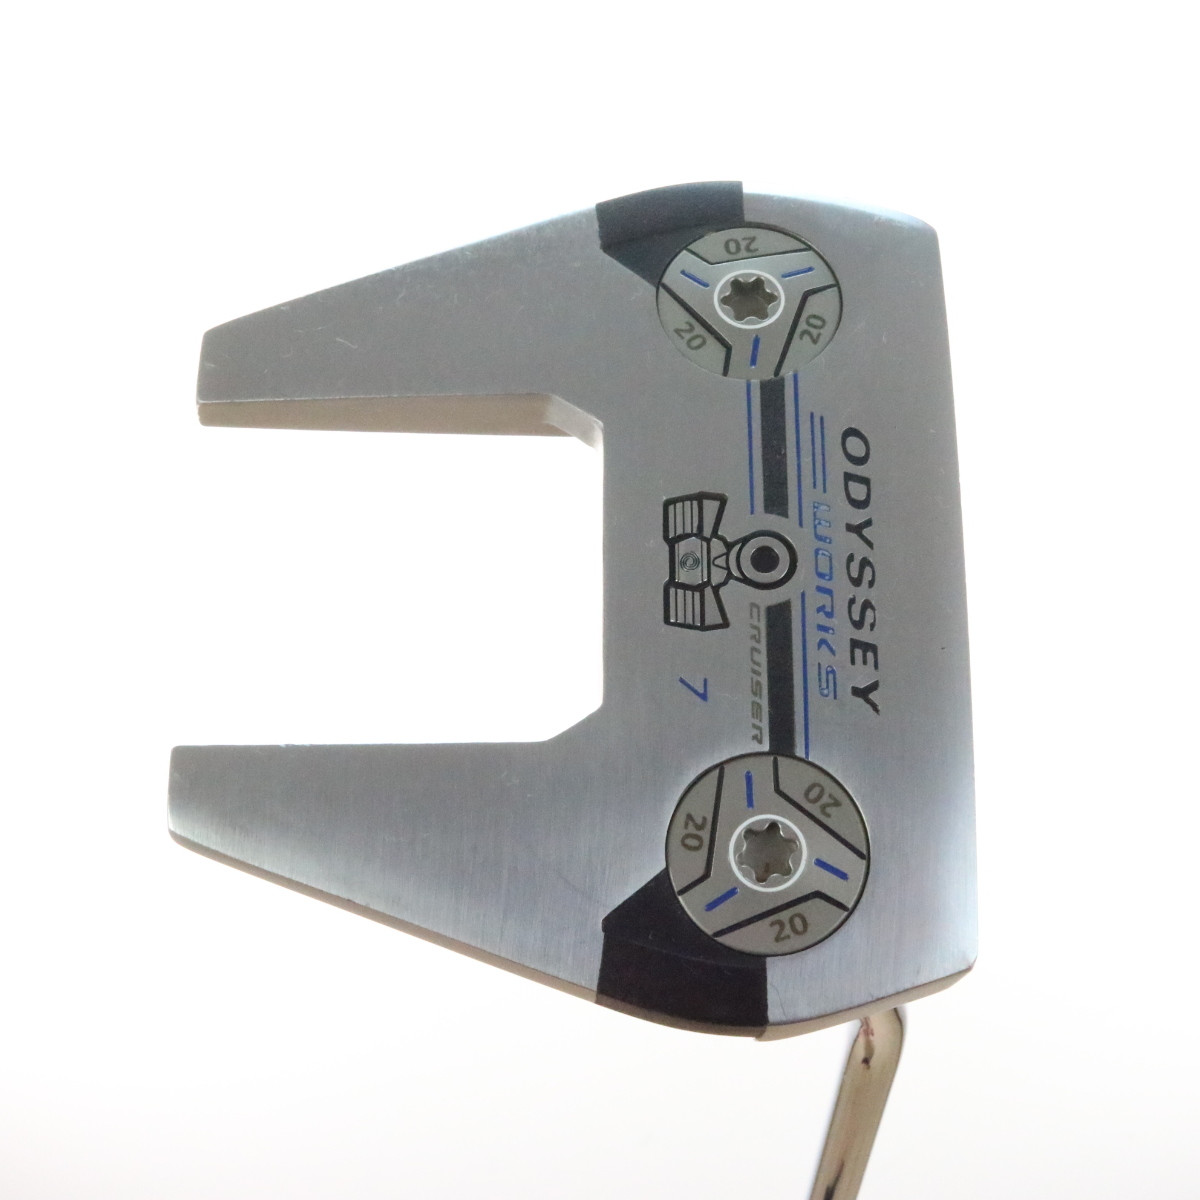 Odyssey Works 7 Tank Cruiser Putter 35 Inches Super Stroke Right-Handed ...